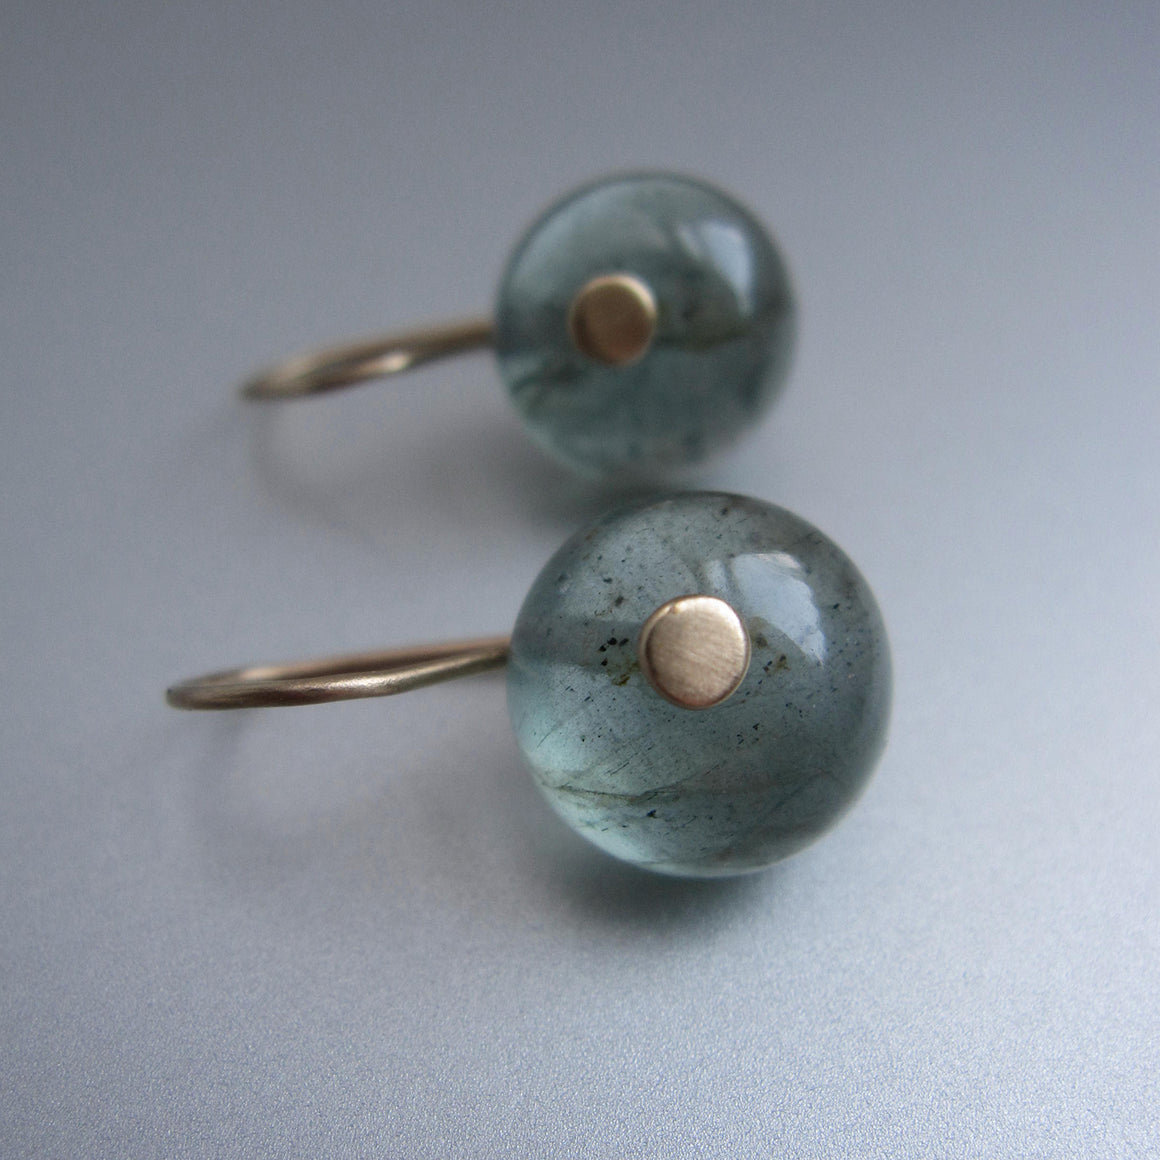 moss aquamarine button drops solid 14k gold earrings